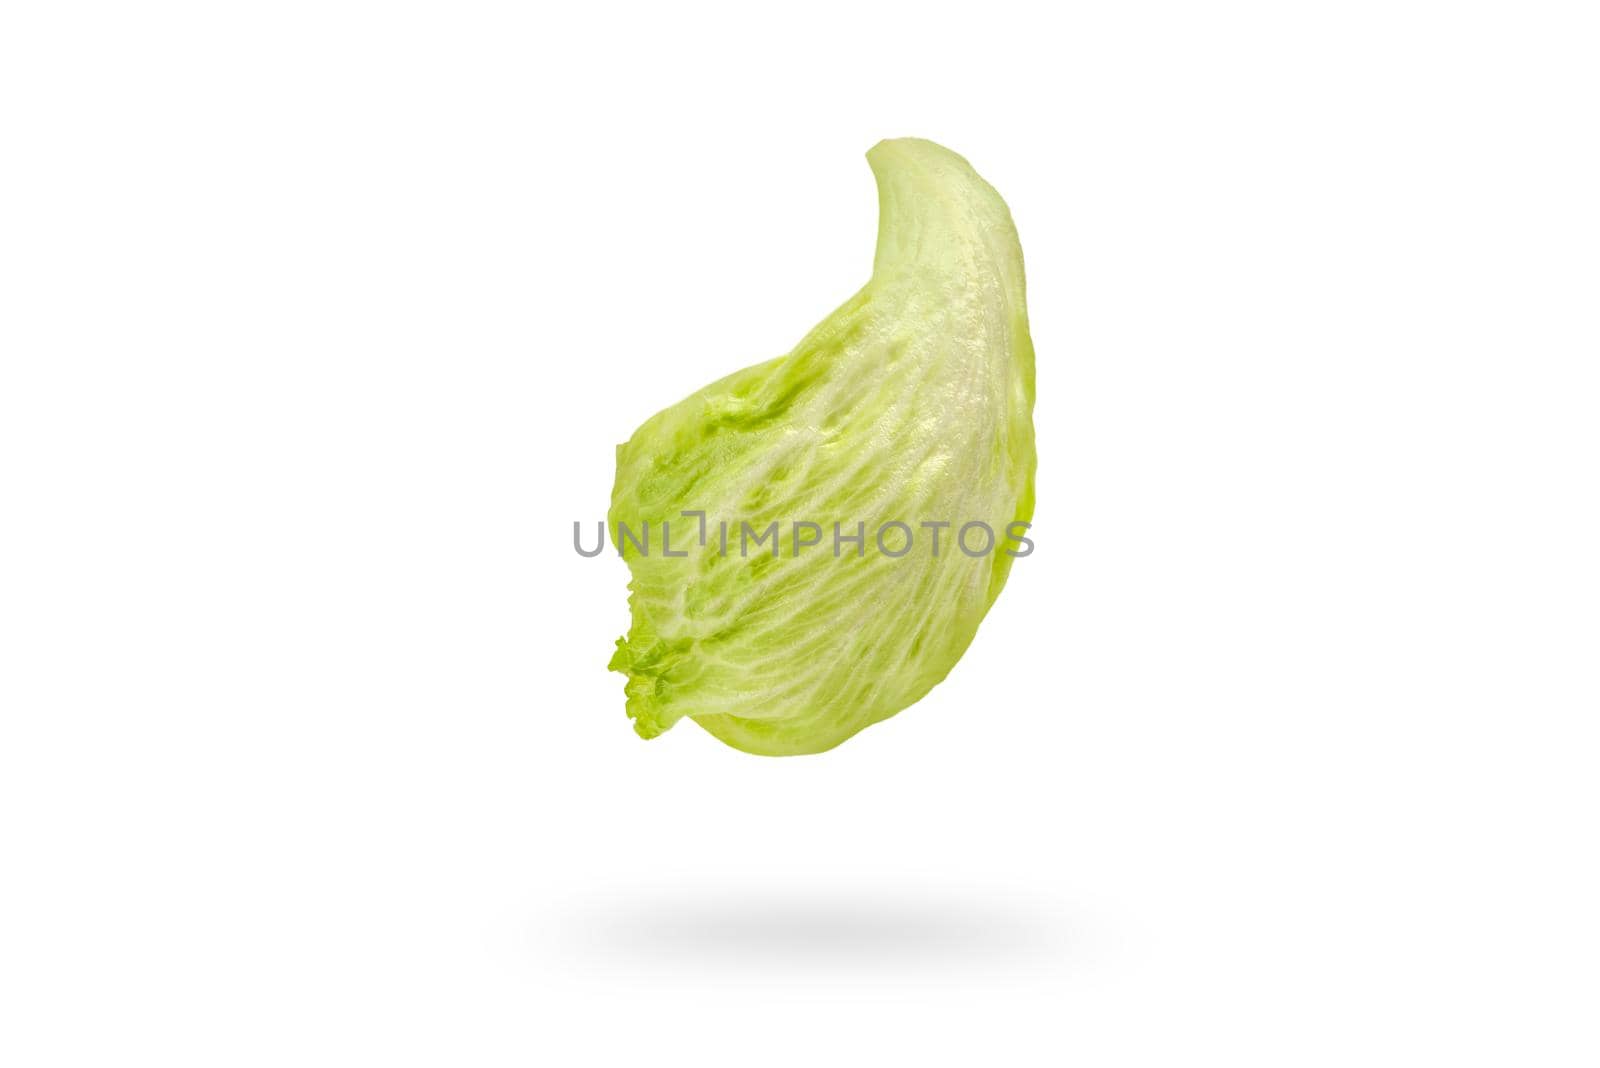 Iceberg lettuce green leaves isolated on white background. Fresh lettuce leaf drops with shadow. Ingredients for hamburgers by SERSOL